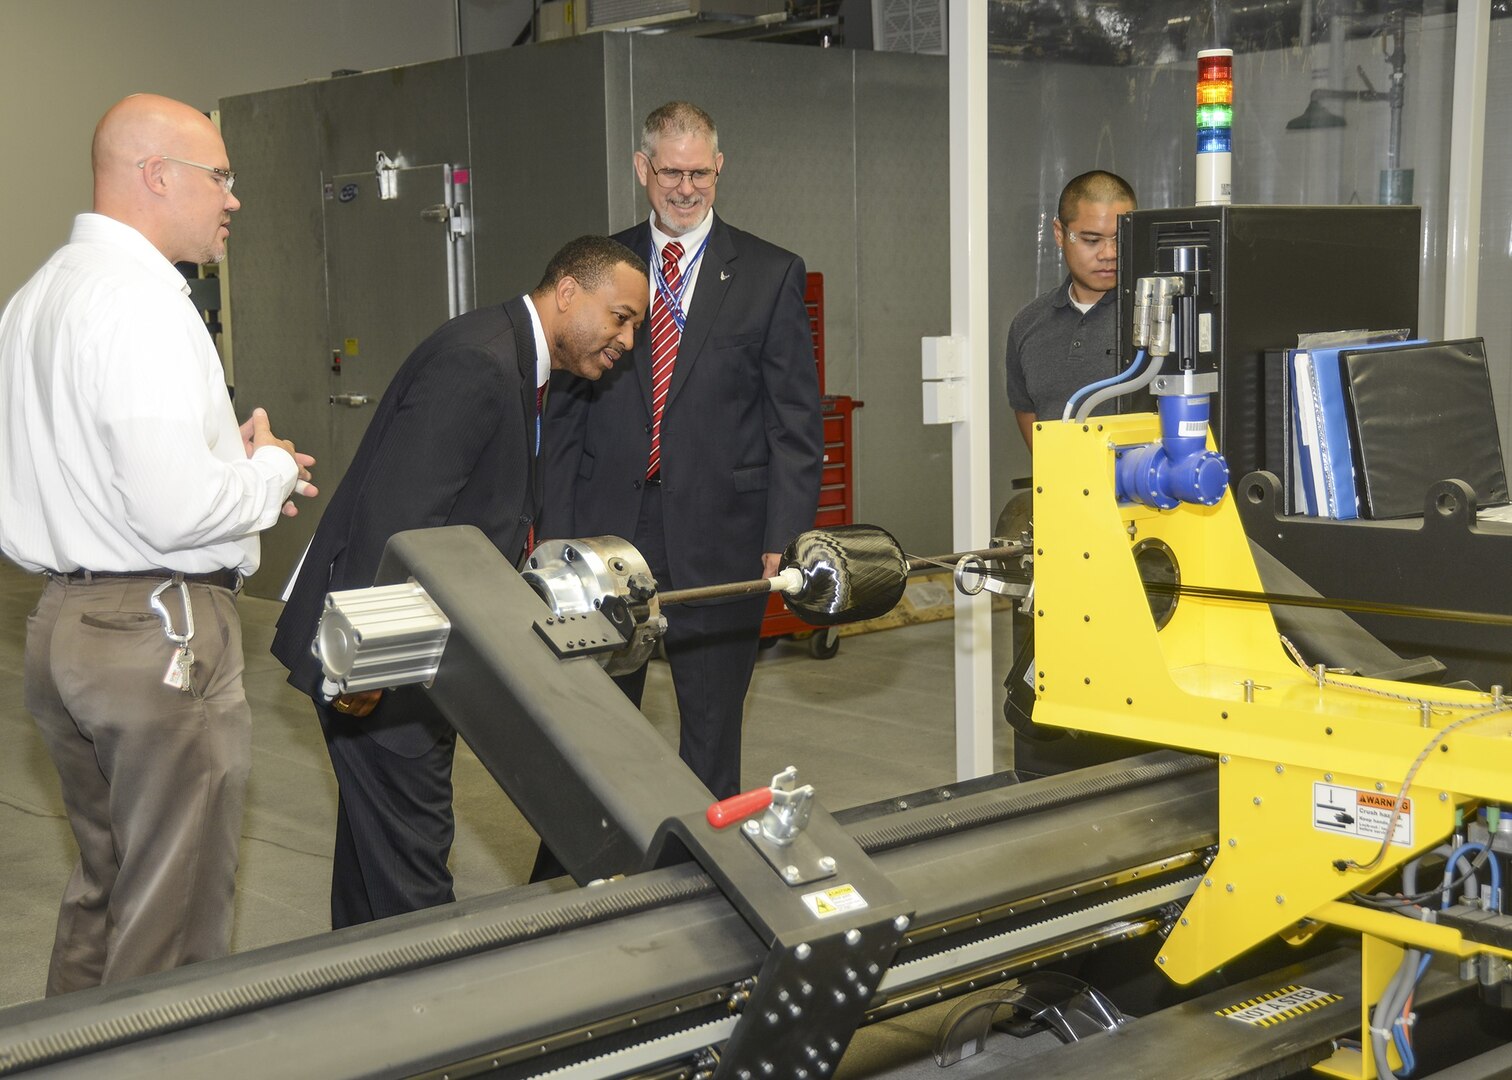 Dr. David E. Walker, center, visited an Air Force Research Laboratory rocket propulsion facility at Edwards Air Force Base, Calif., Sept. 23, 2015. At the time, Walker served as deputy assistant secretary of the Air Force for science, technology and engineering in the Office of the Assistant Secretary of the Air Force for Acquisition. As a senior executive for the Air Force, Walker was responsible for preparing policy, guidance and advocacy for the Air Force's science and technology program, which was then estimated at an annual $2 billion. (U.S. Air Force photo / Kenji Thuloweit)